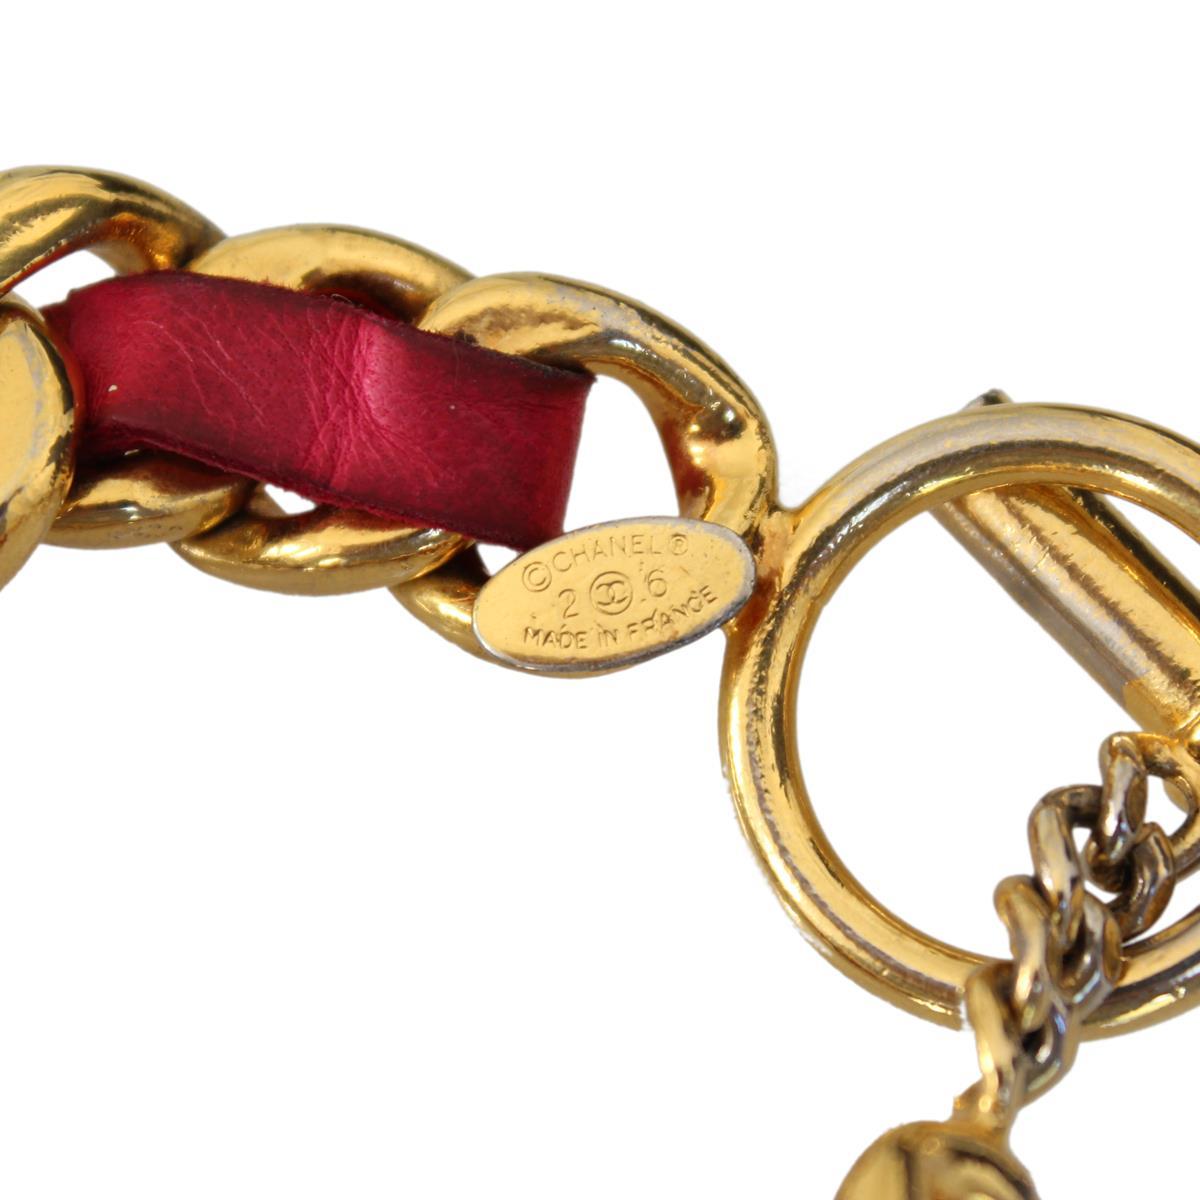 Beautiful Chanel vintage bracelet
Vintage from the 90s
Leather
Red color
Golden chain
Conditions : good considering wear and age
Worldwide express shipping included in the price !